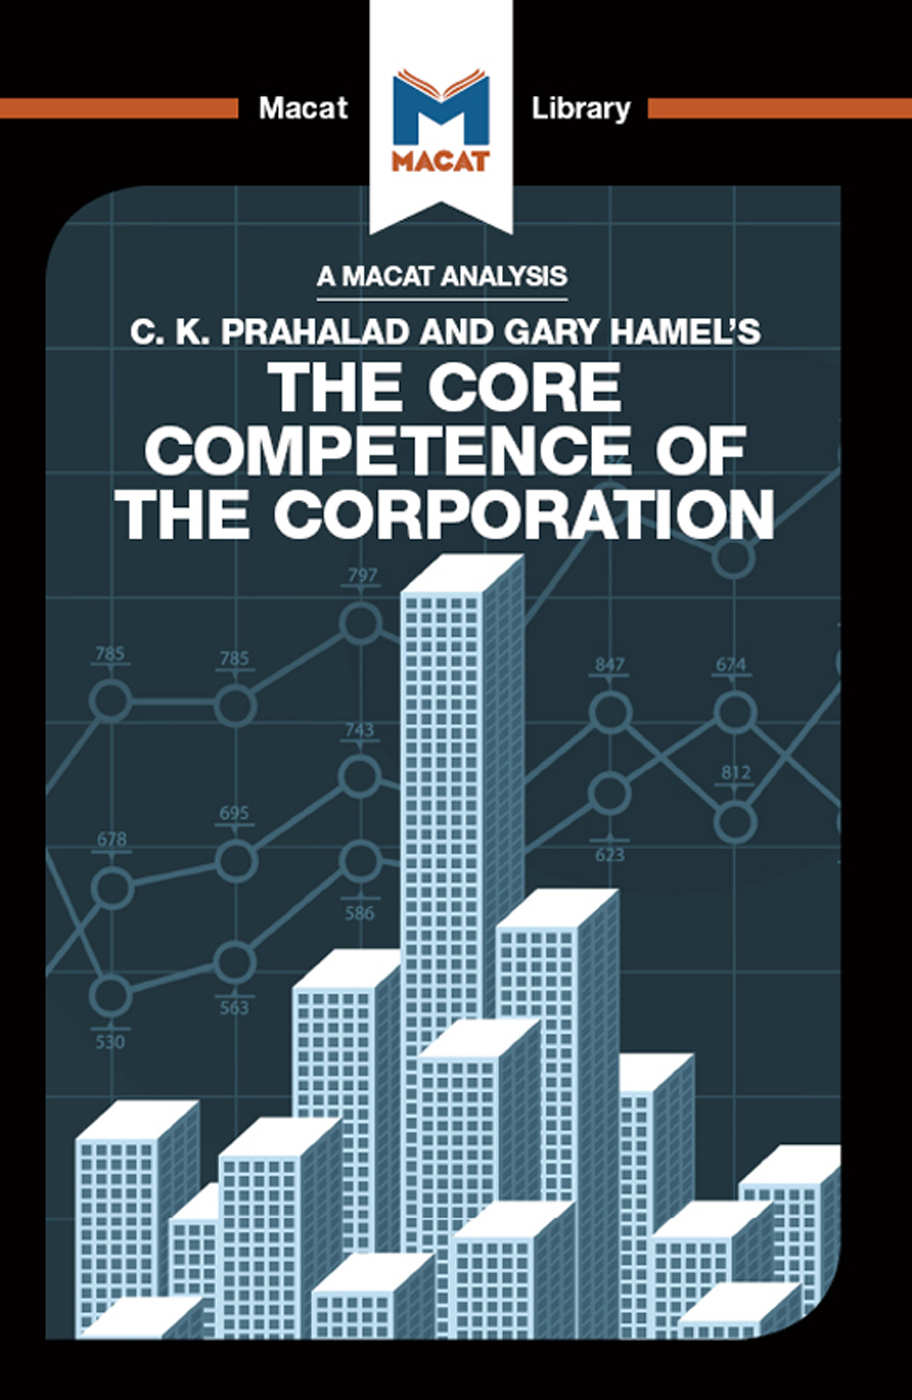 The Core Competence of the Corporation | The Macat Team